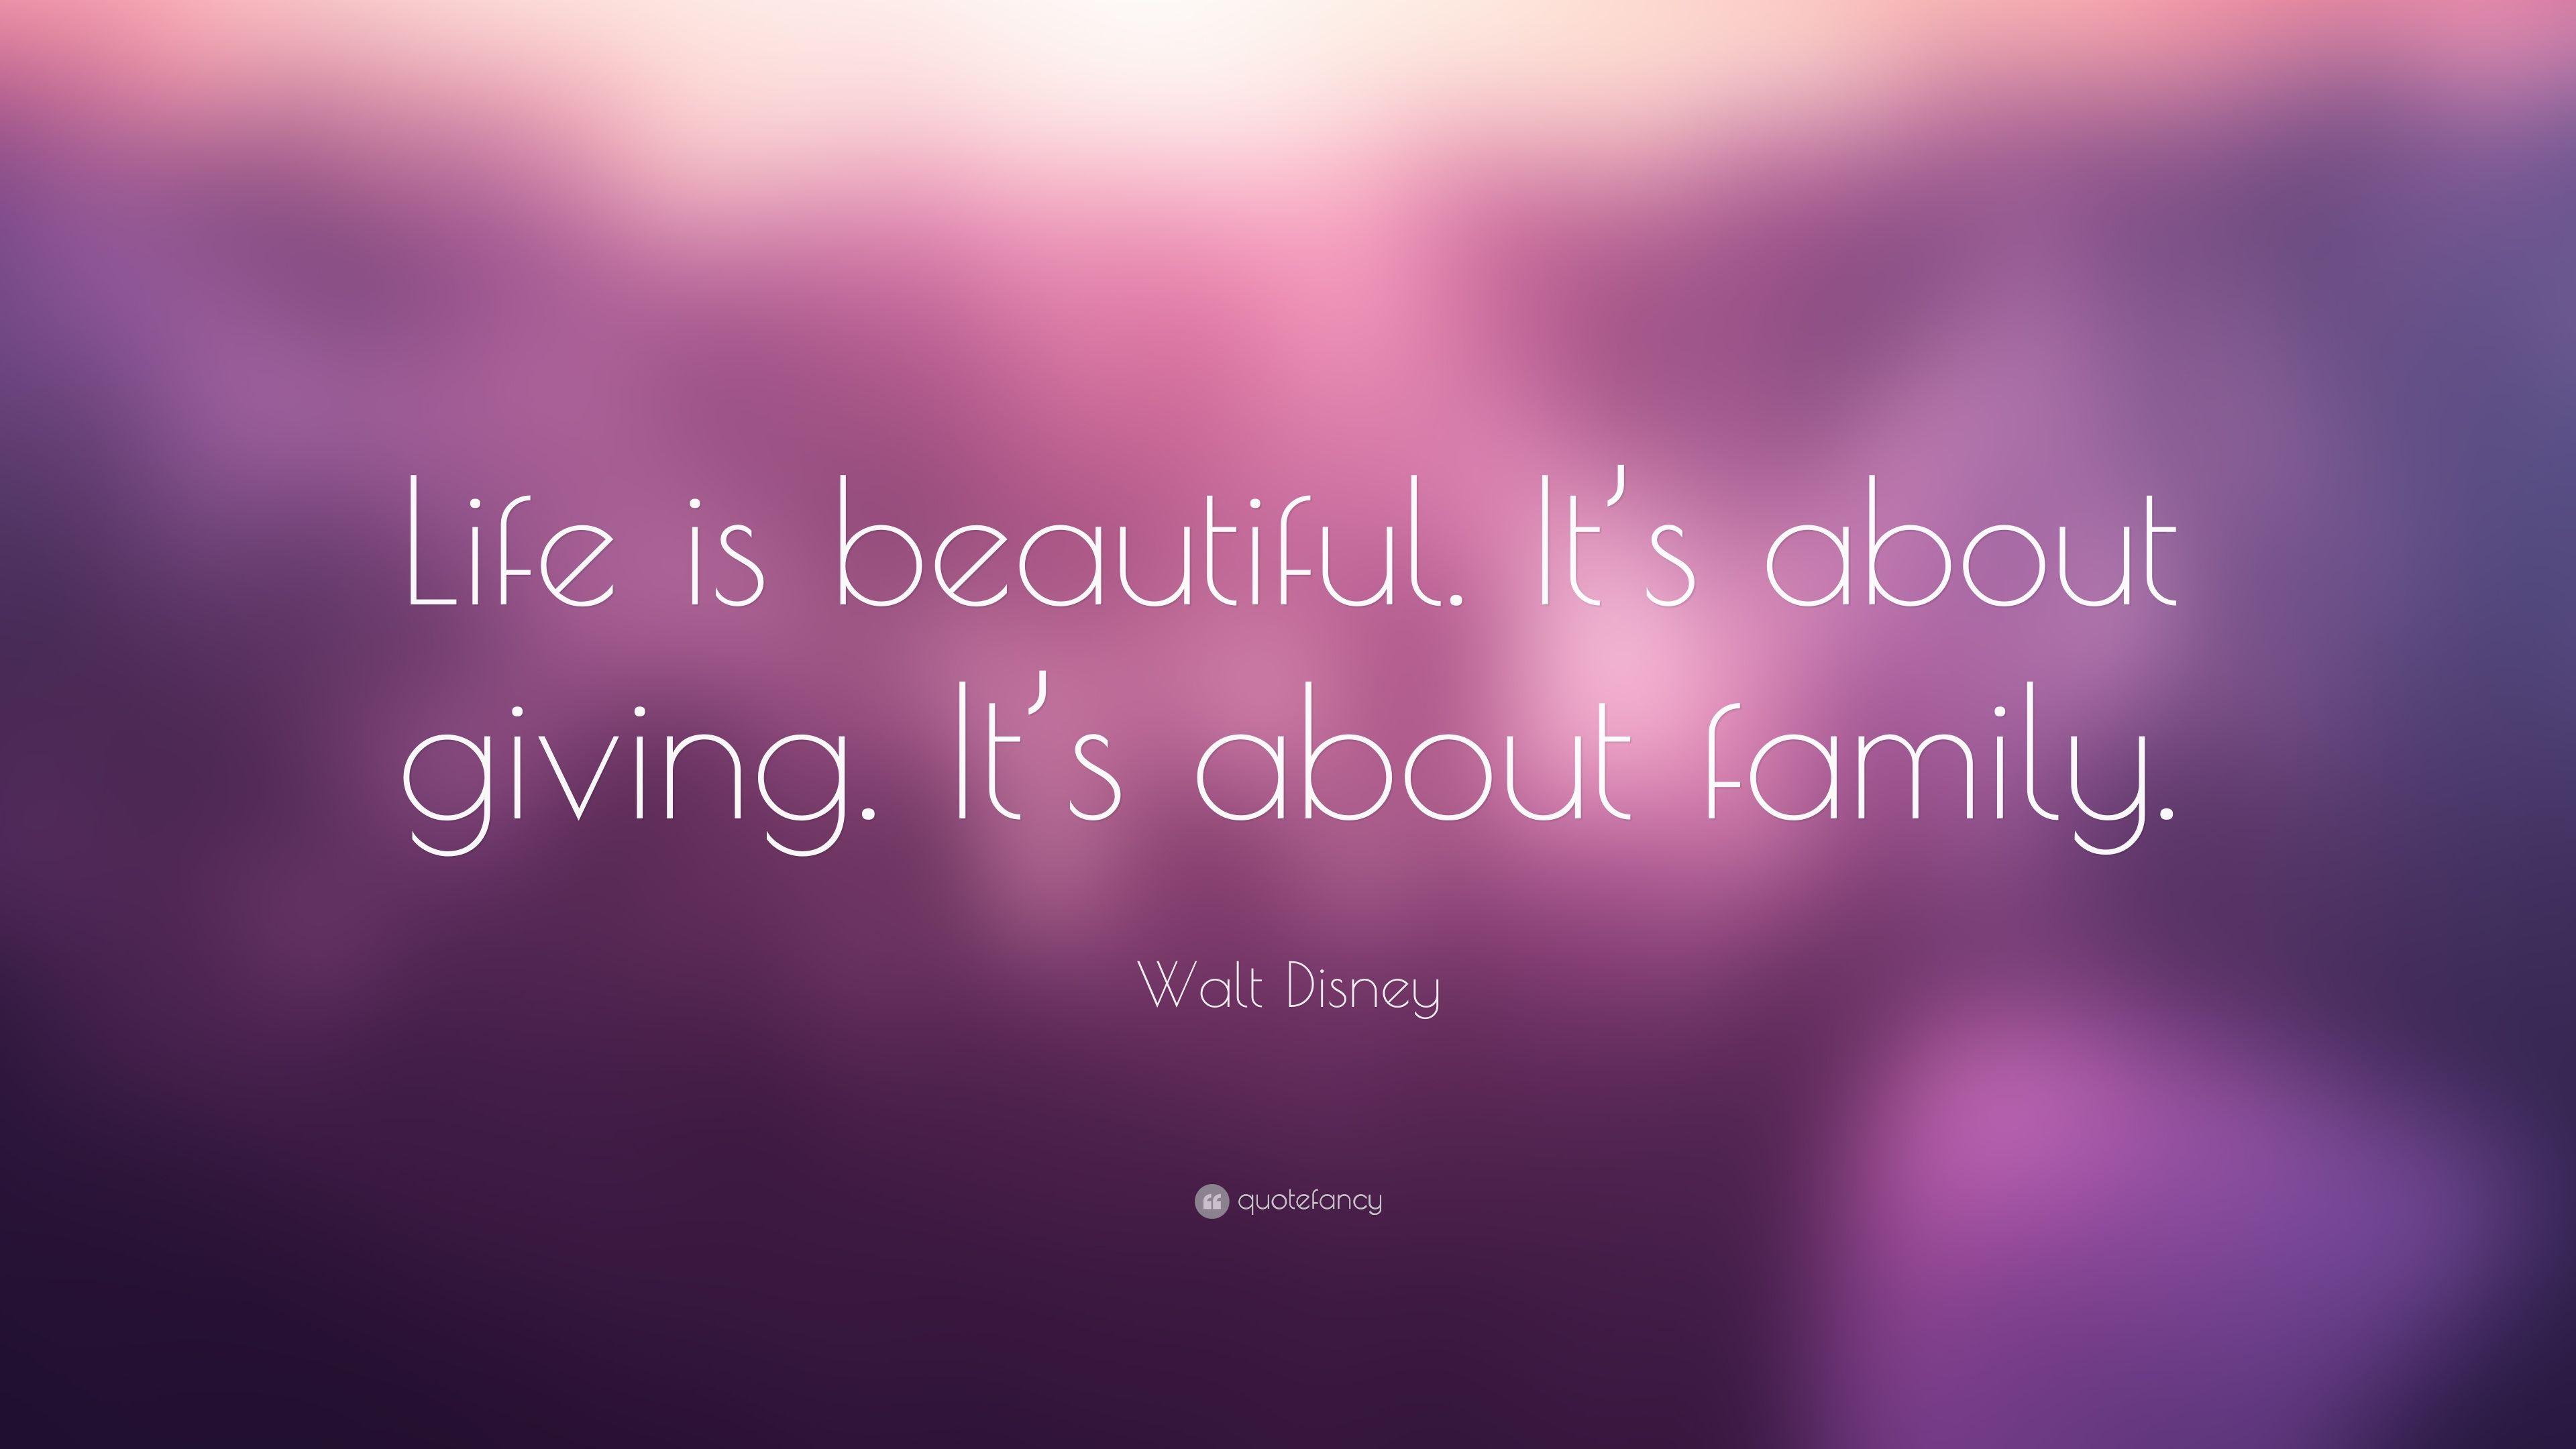 Walt Disney Quote: “Life is beautiful. It's about giving. It's about